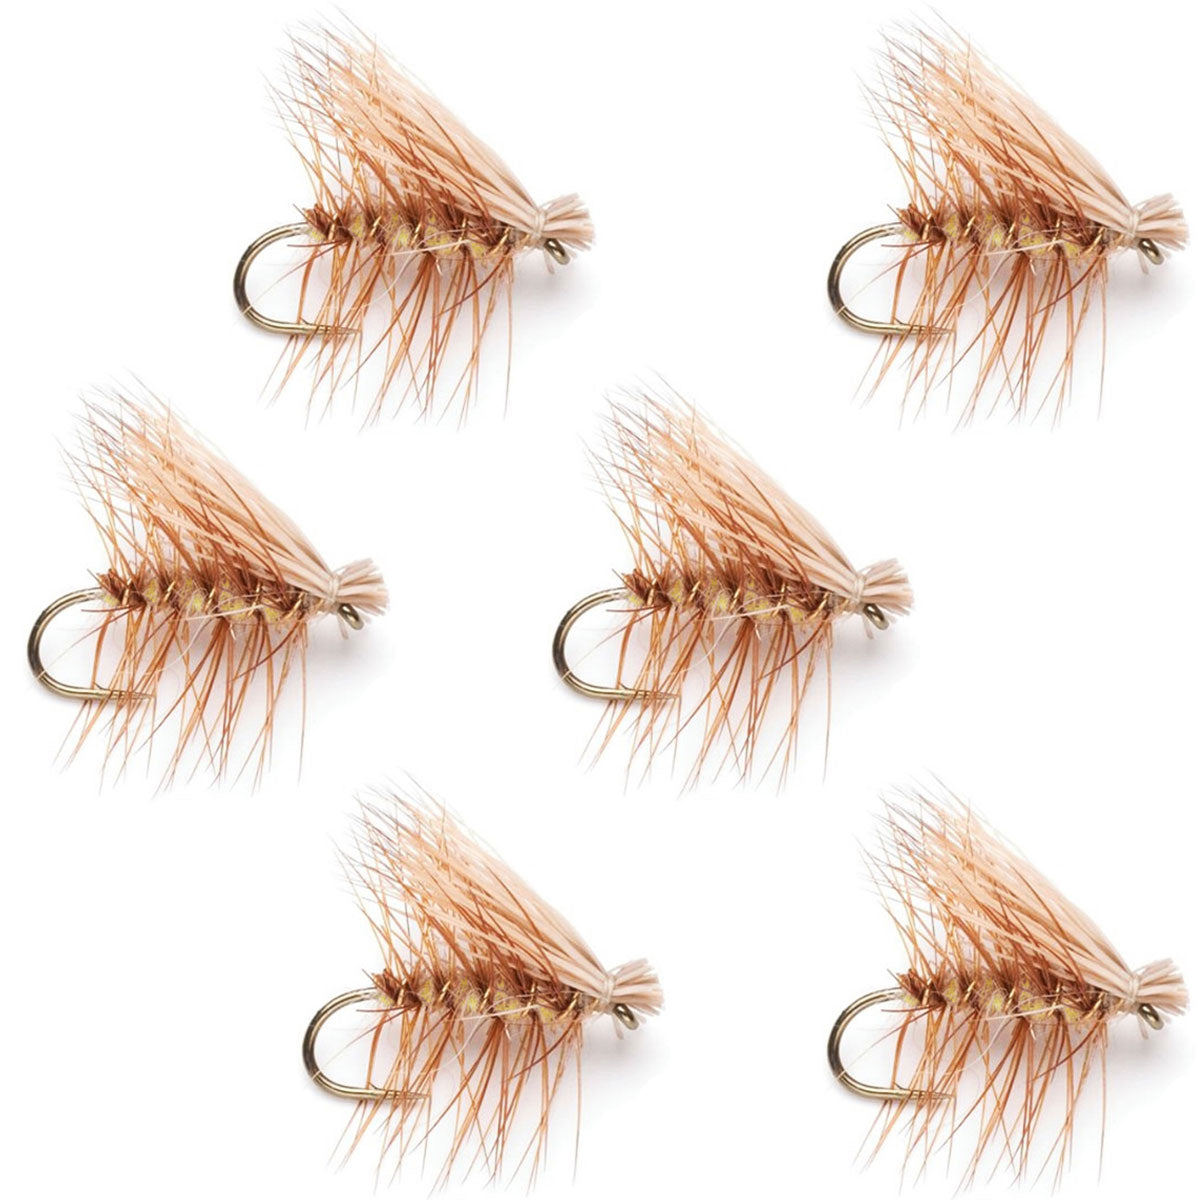 Tan Elk Hair Caddis Classic Trout Dry Fly - Set of 6 Flies Size 18